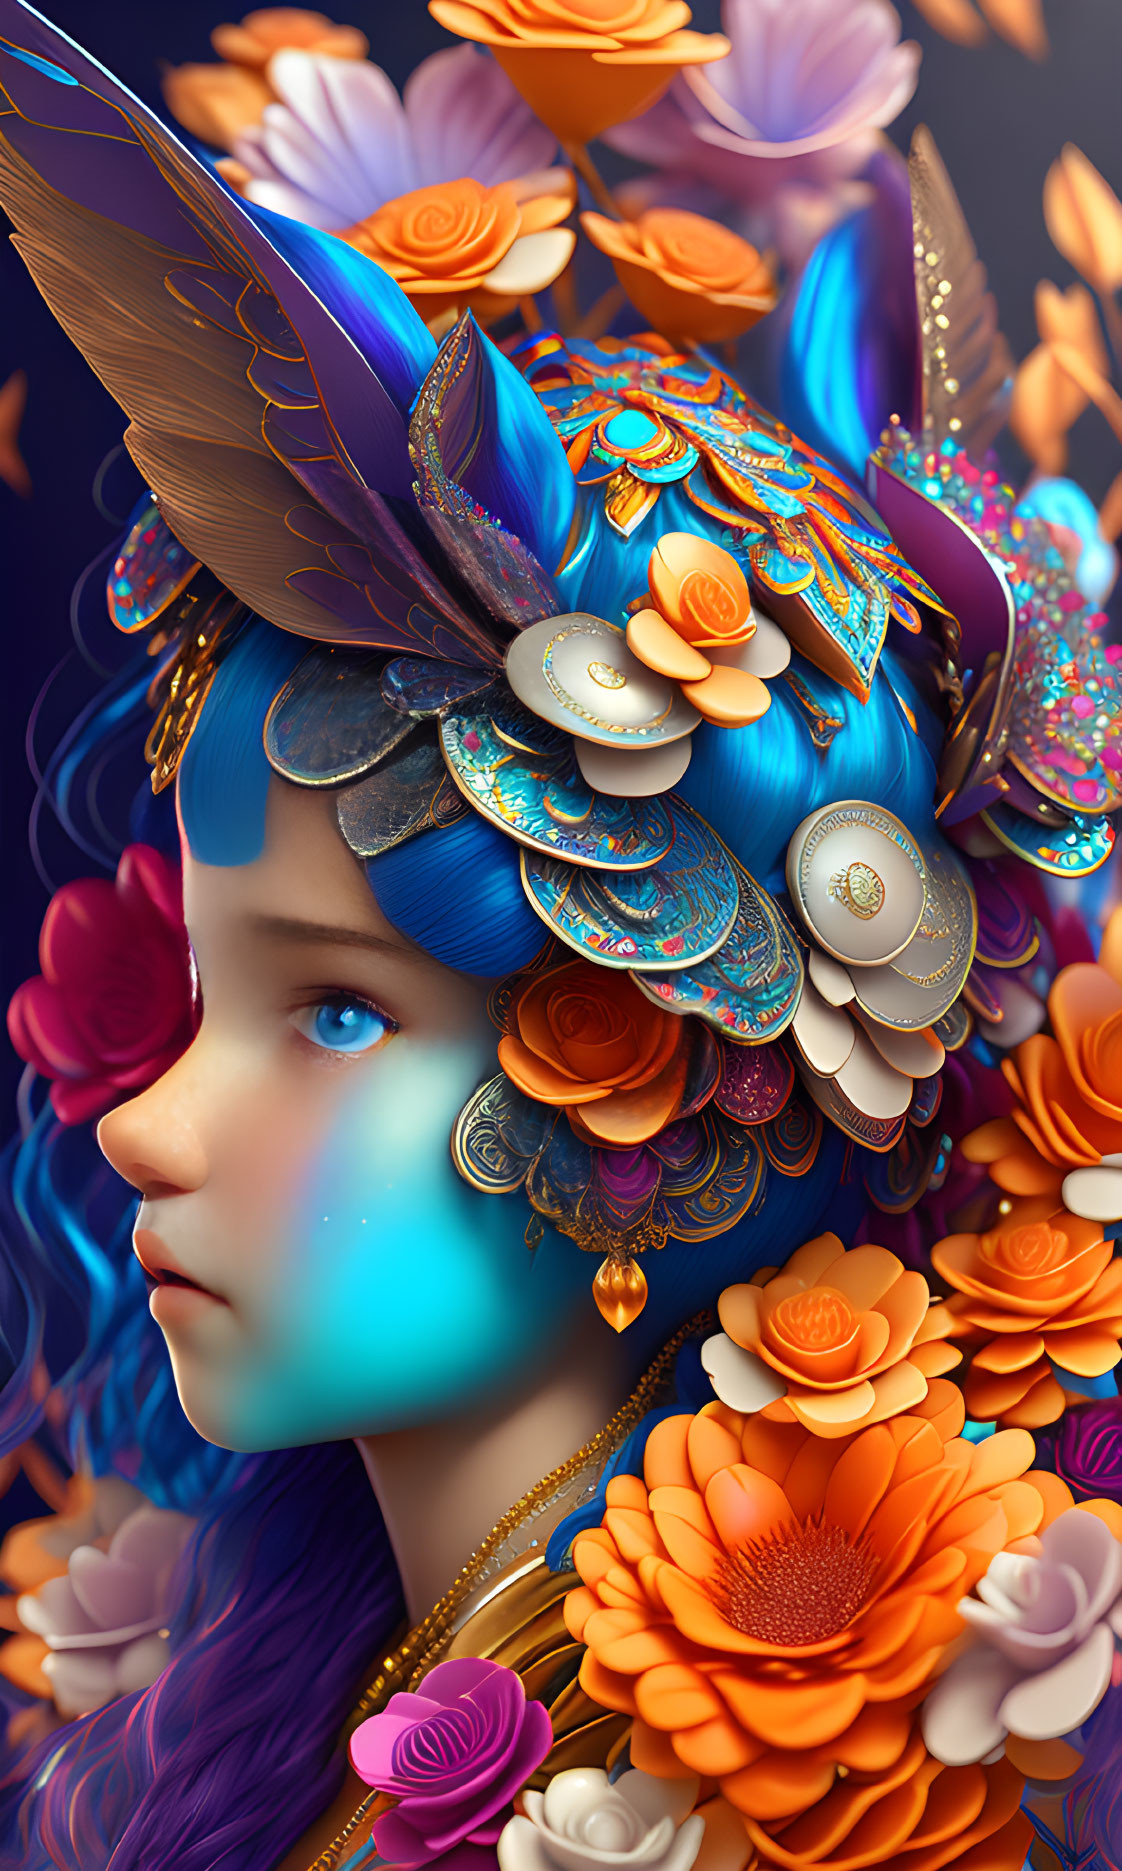 Colorful digital artwork: Blue-skinned person with purple hair and ornate headdress